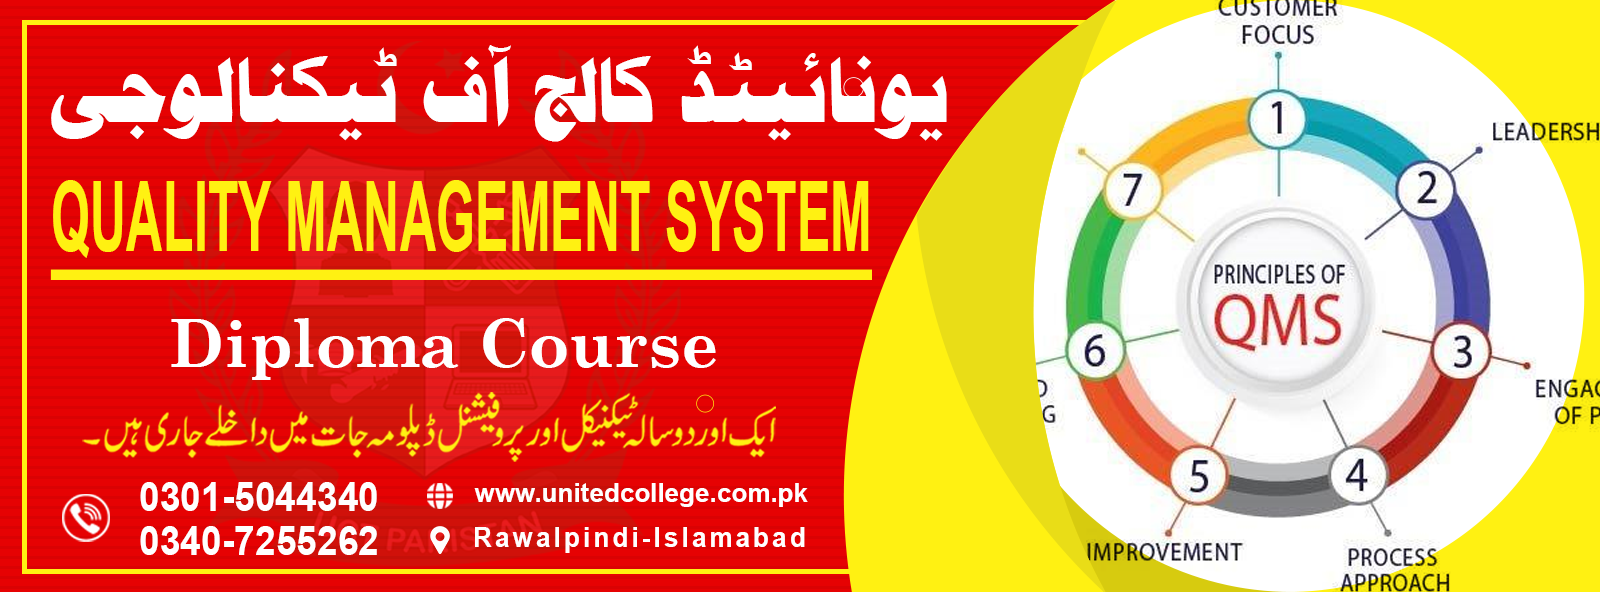 QUALITY MANAGEMENT SYSTEM COURSE